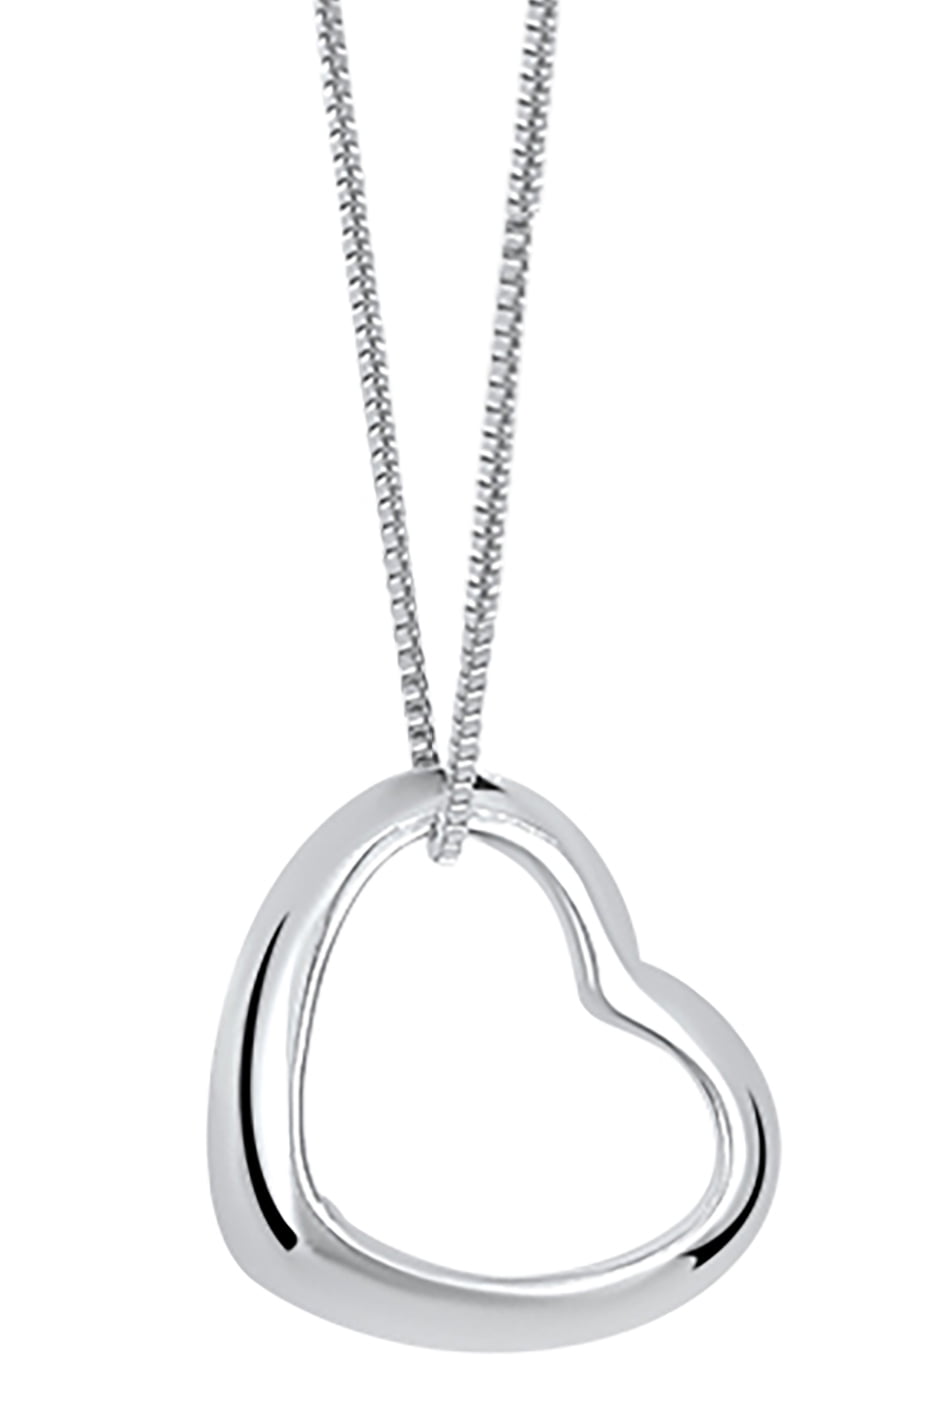 Genuine .925 Sterling Silver Heart With Pendant Necklace Fashion Jewelry 